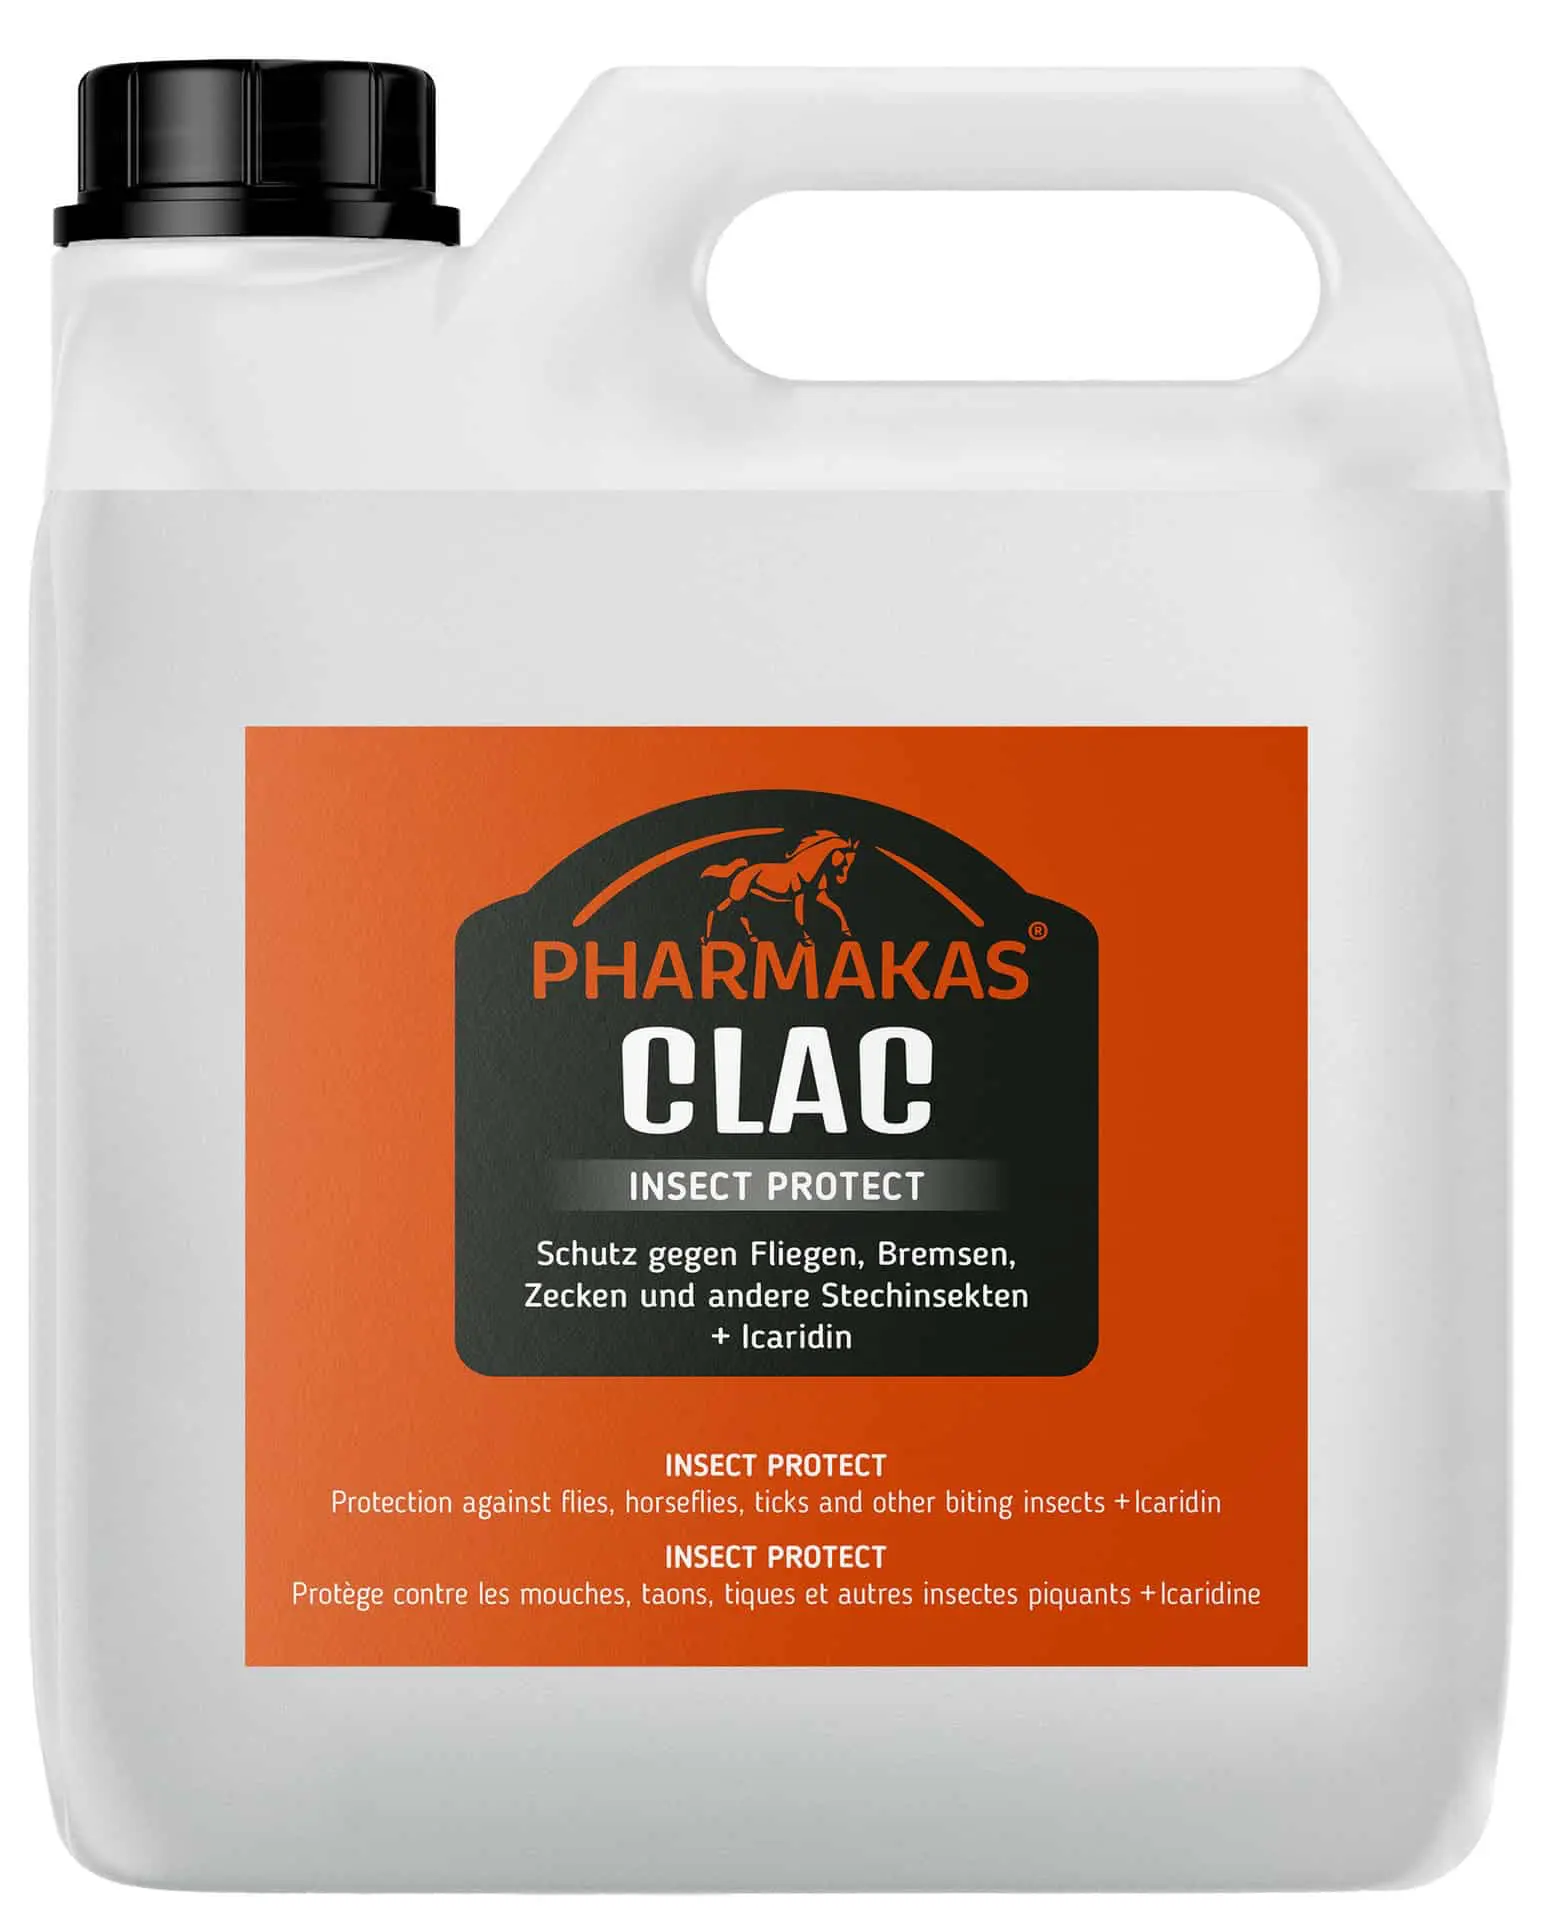 Pharmakas Clac Insect Protect 2,5 liter